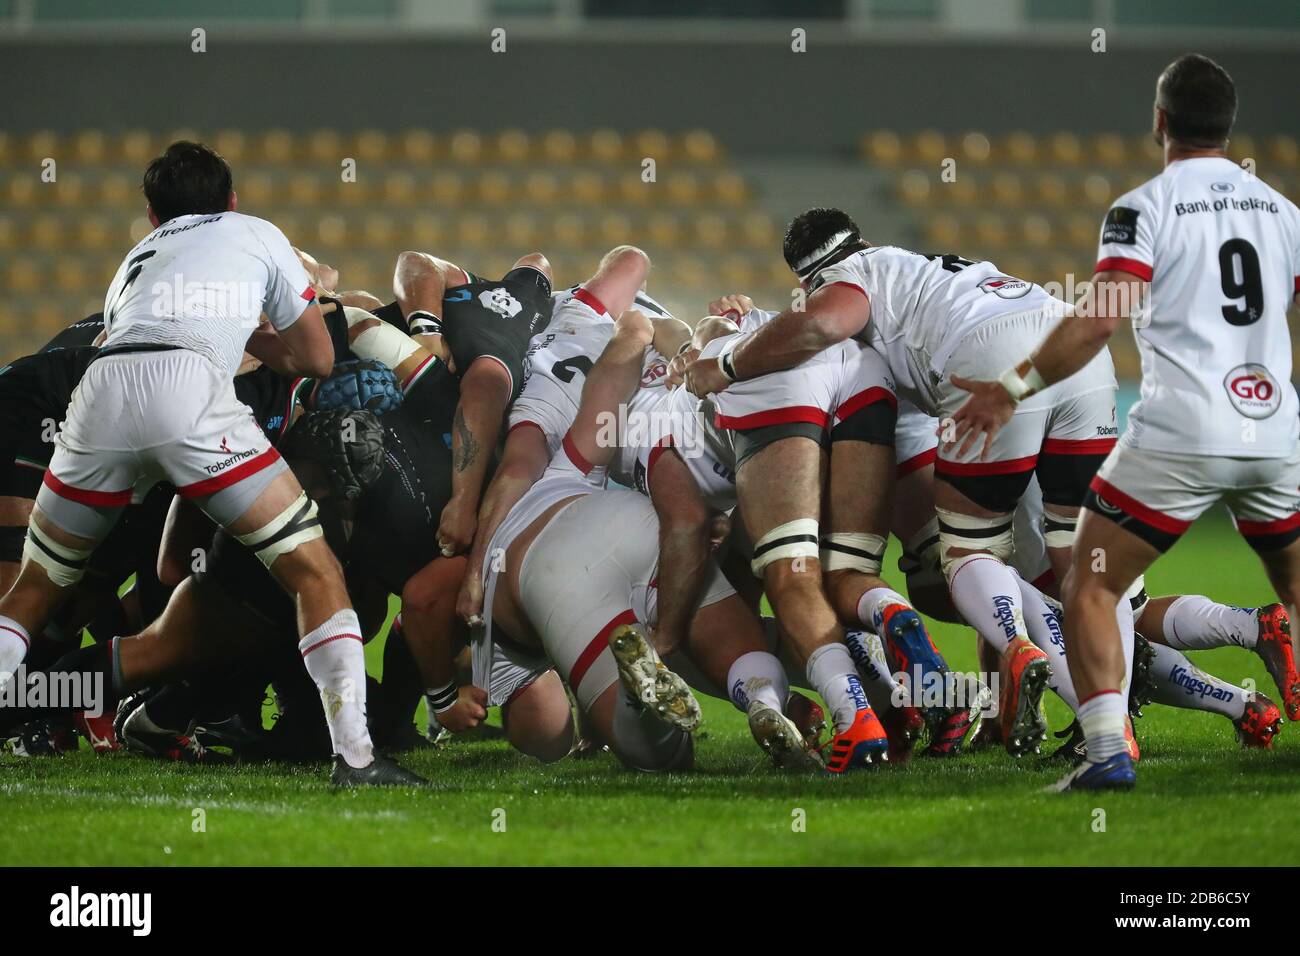 Parma, Italy. 16th Nov, 2020. parma, Italy, Sergio Lanfranchi stadium, 16 Nov 2020, The scrum collapses during Zebre Rugby vs Ulster Rugby - Rugby Guinness Pro 14 match - Credit: LM/Massimiliano Carnabuci Credit: Massimiliano Carnabuci/LPS/ZUMA Wire/Alamy Live News Stock Photo